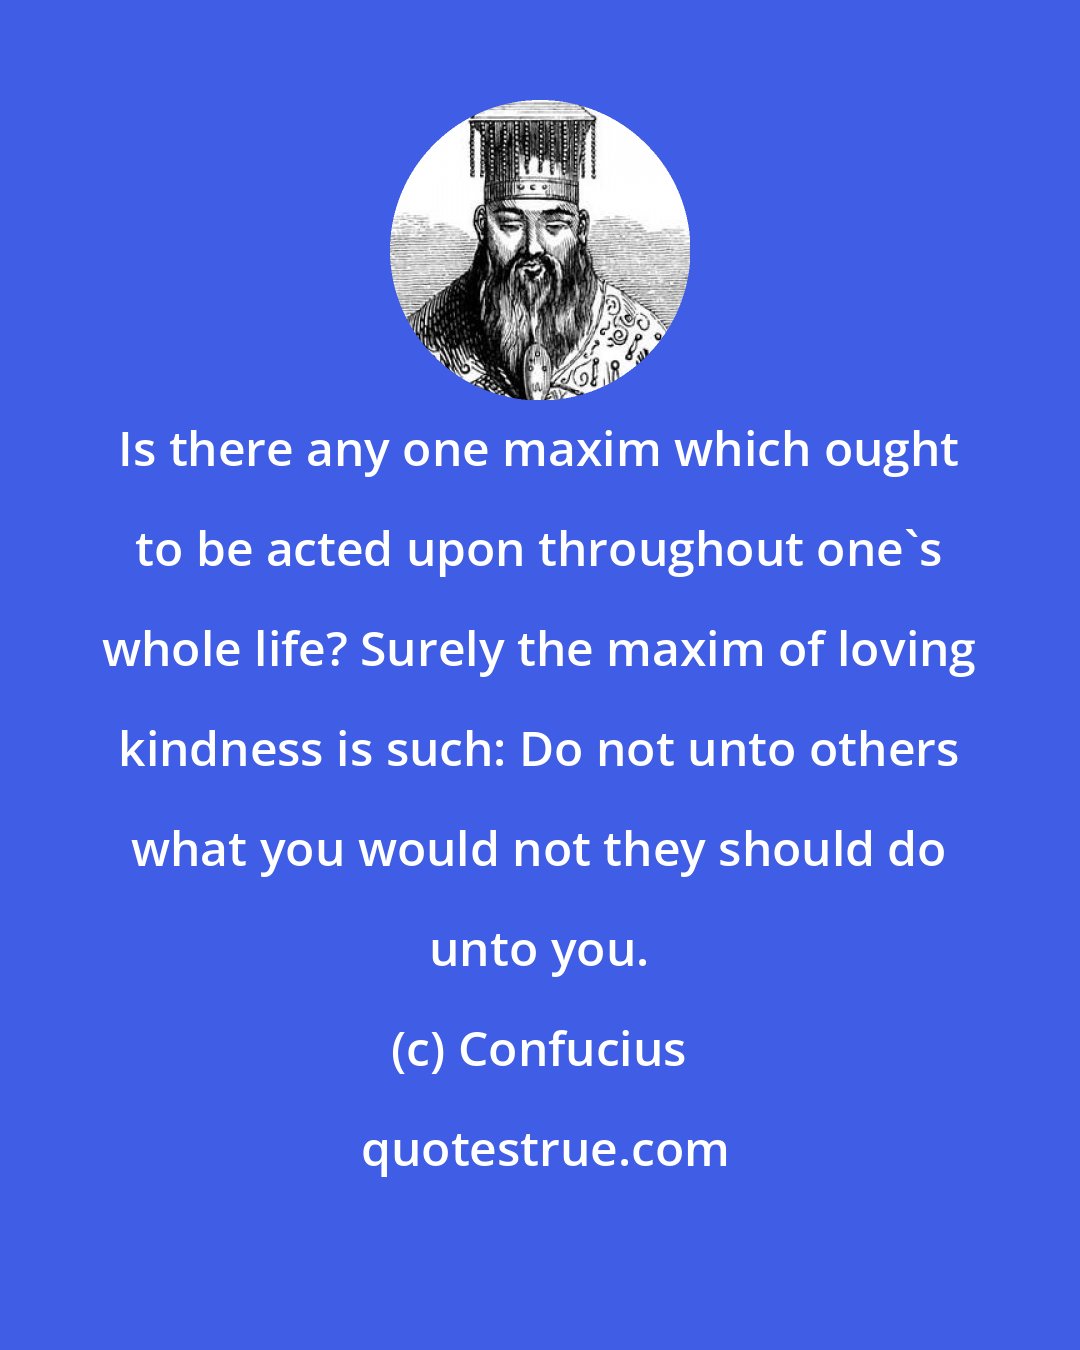 Confucius: Is there any one maxim which ought to be acted upon throughout one's whole life? Surely the maxim of loving kindness is such: Do not unto others what you would not they should do unto you.